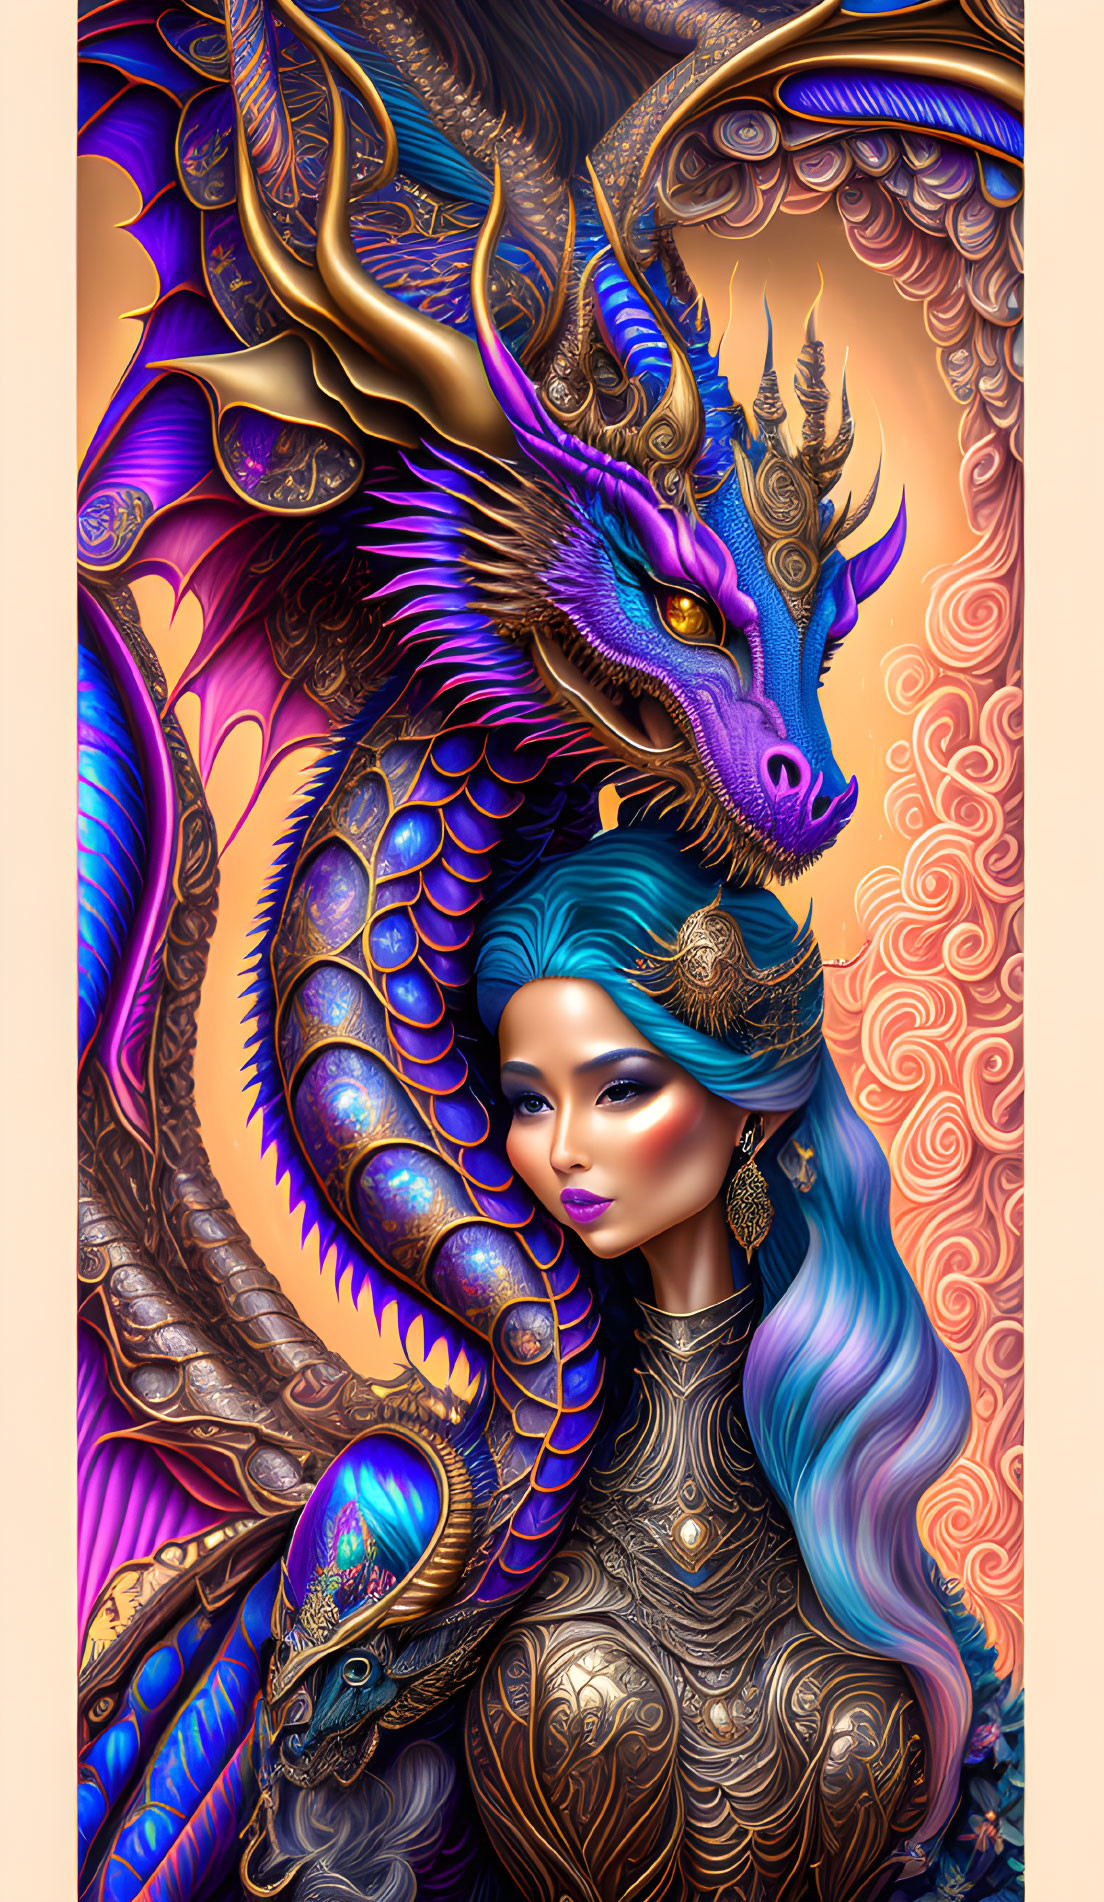 Colorful Illustration: Woman with Blue Hair and Ornate Dragon